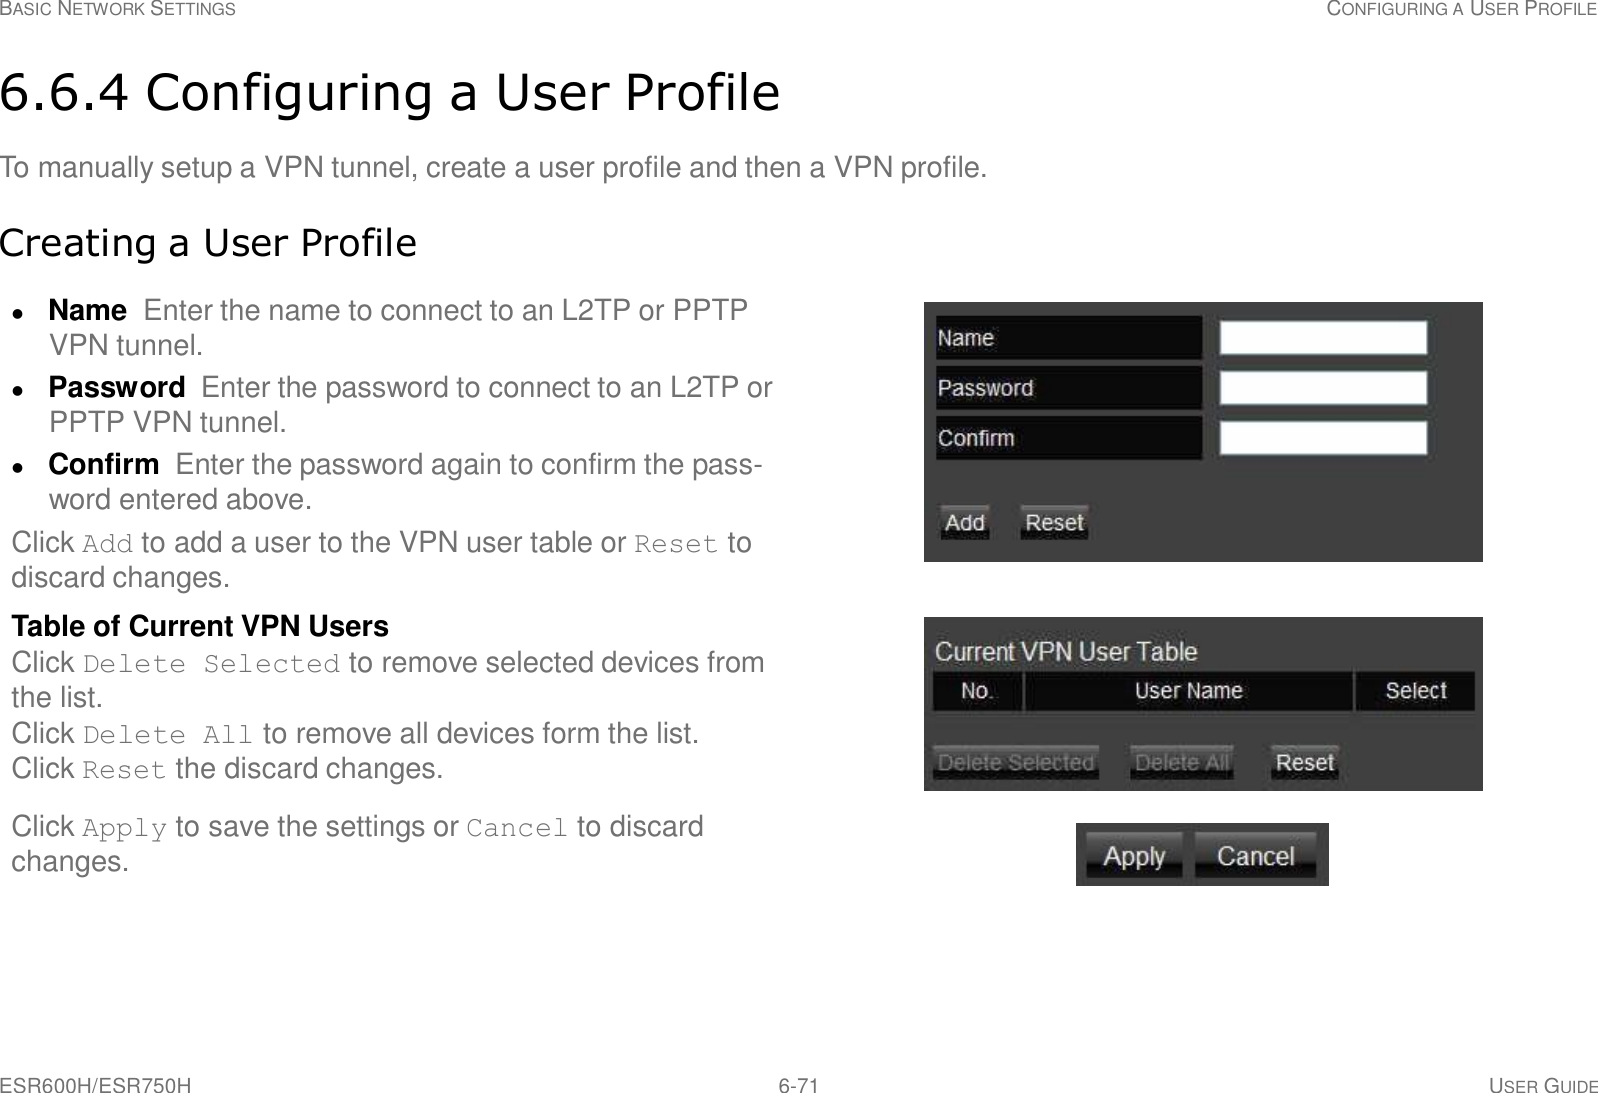 ESR600H/ESR750H 6-71 USER GUIDE BASIC NETWORK SETTINGS CONFIGURING A USER PROFILE     6.6.4 Configuring a User Profile  To manually setup a VPN tunnel, create a user profile and then a VPN profile.   Creating a User Profile   Name Enter the name to connect to an L2TP or PPTP VPN tunnel.  Password  Enter the password to connect to an L2TP or PPTP VPN tunnel.  Confirm  Enter the password again to confirm the pass- word entered above. Click Add to add a user to the VPN user table or Reset to discard changes.  Table of Current VPN Users Click Delete Selected to remove selected devices from the list. Click Delete All to remove all devices form the list. Click Reset the discard changes.  Click Apply to save the settings or Cancel to discard changes. 